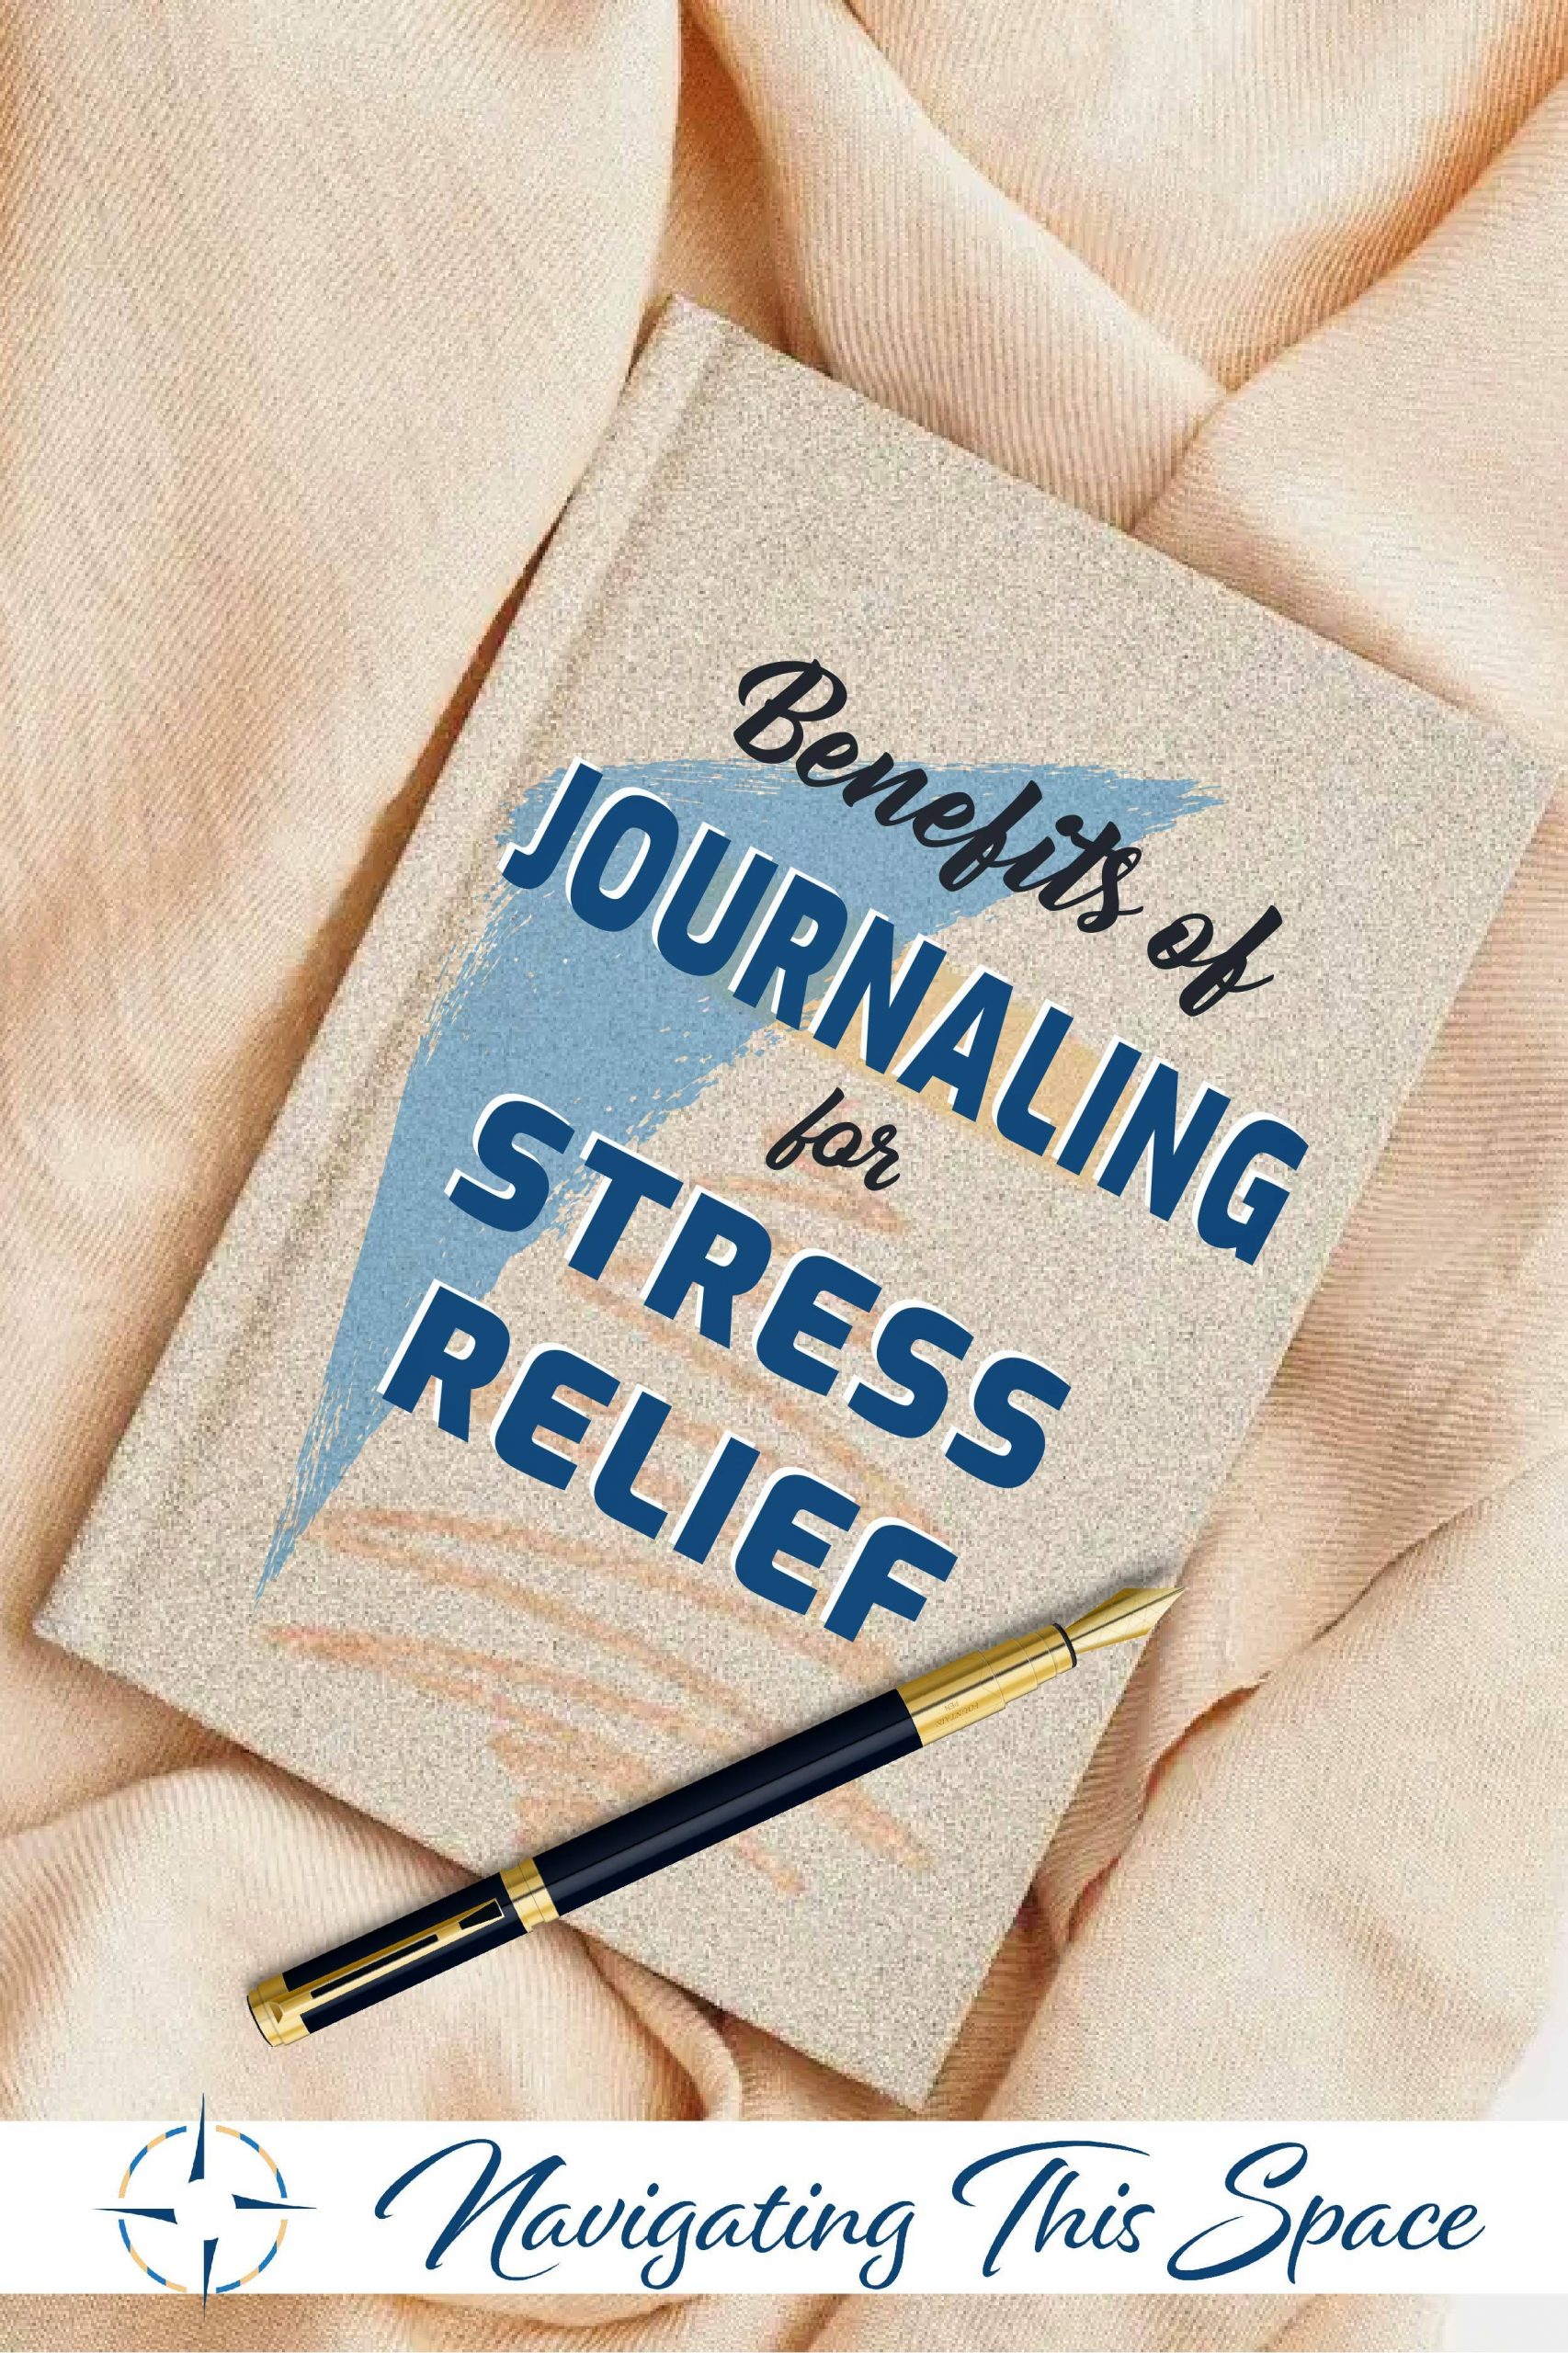 Benefits of Journaling for stress relief